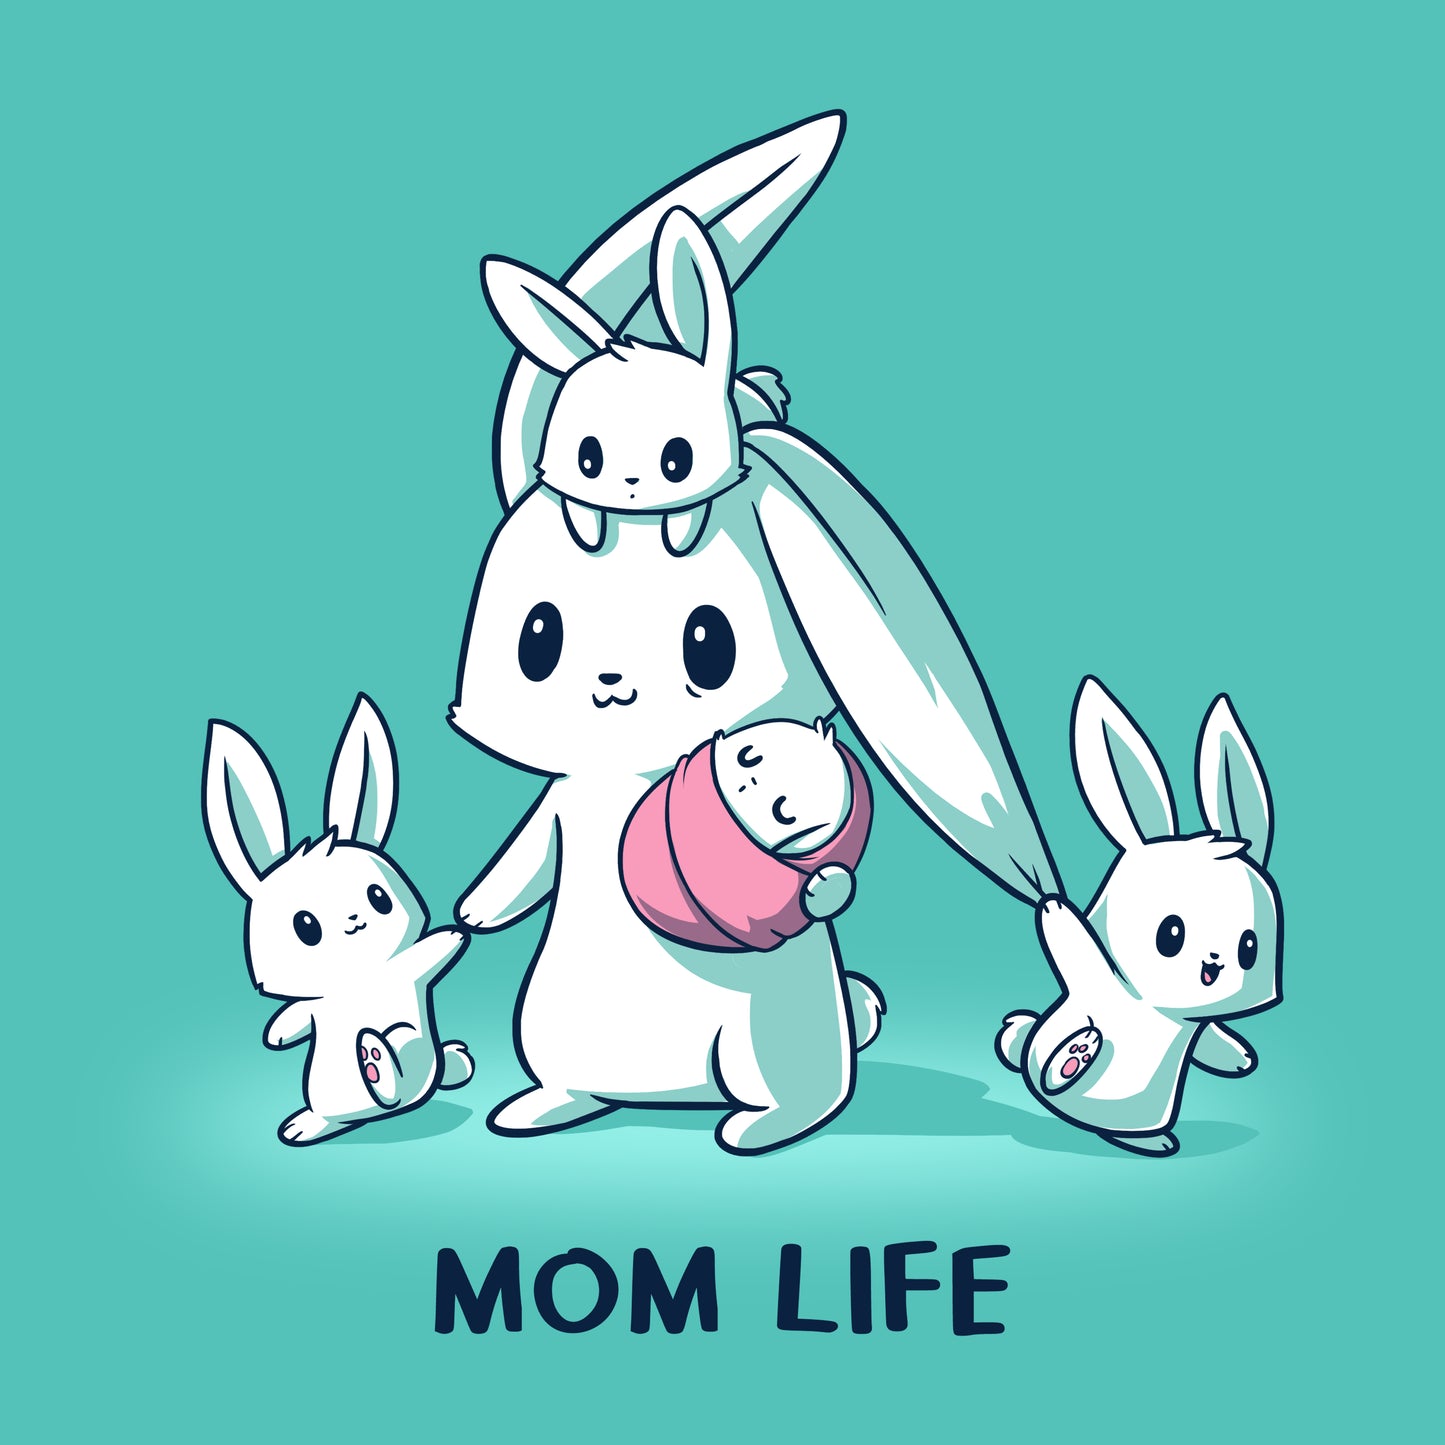 An illustration by monsterdigital of a mother rabbit holding a baby rabbit's hand, with another small rabbit climbing on her head. The text "Mom Life" is displayed at the bottom. The Caribbean Blue background adds a charming touch to the scene.